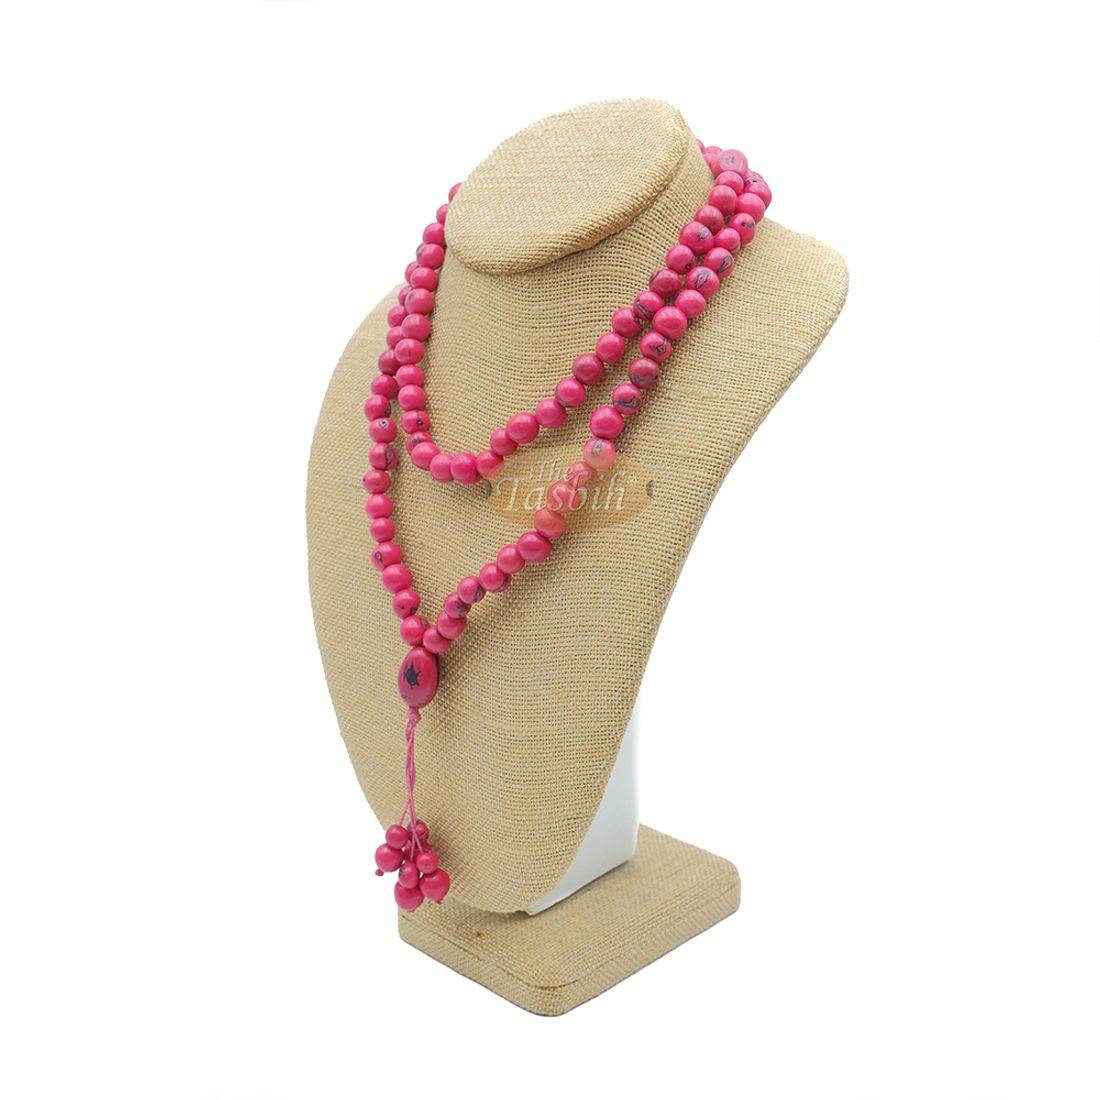 Pink Colored Natural Dye Eco-friendly Sustainable Original Açai Seed 9mm Beads Traditional Tasbih